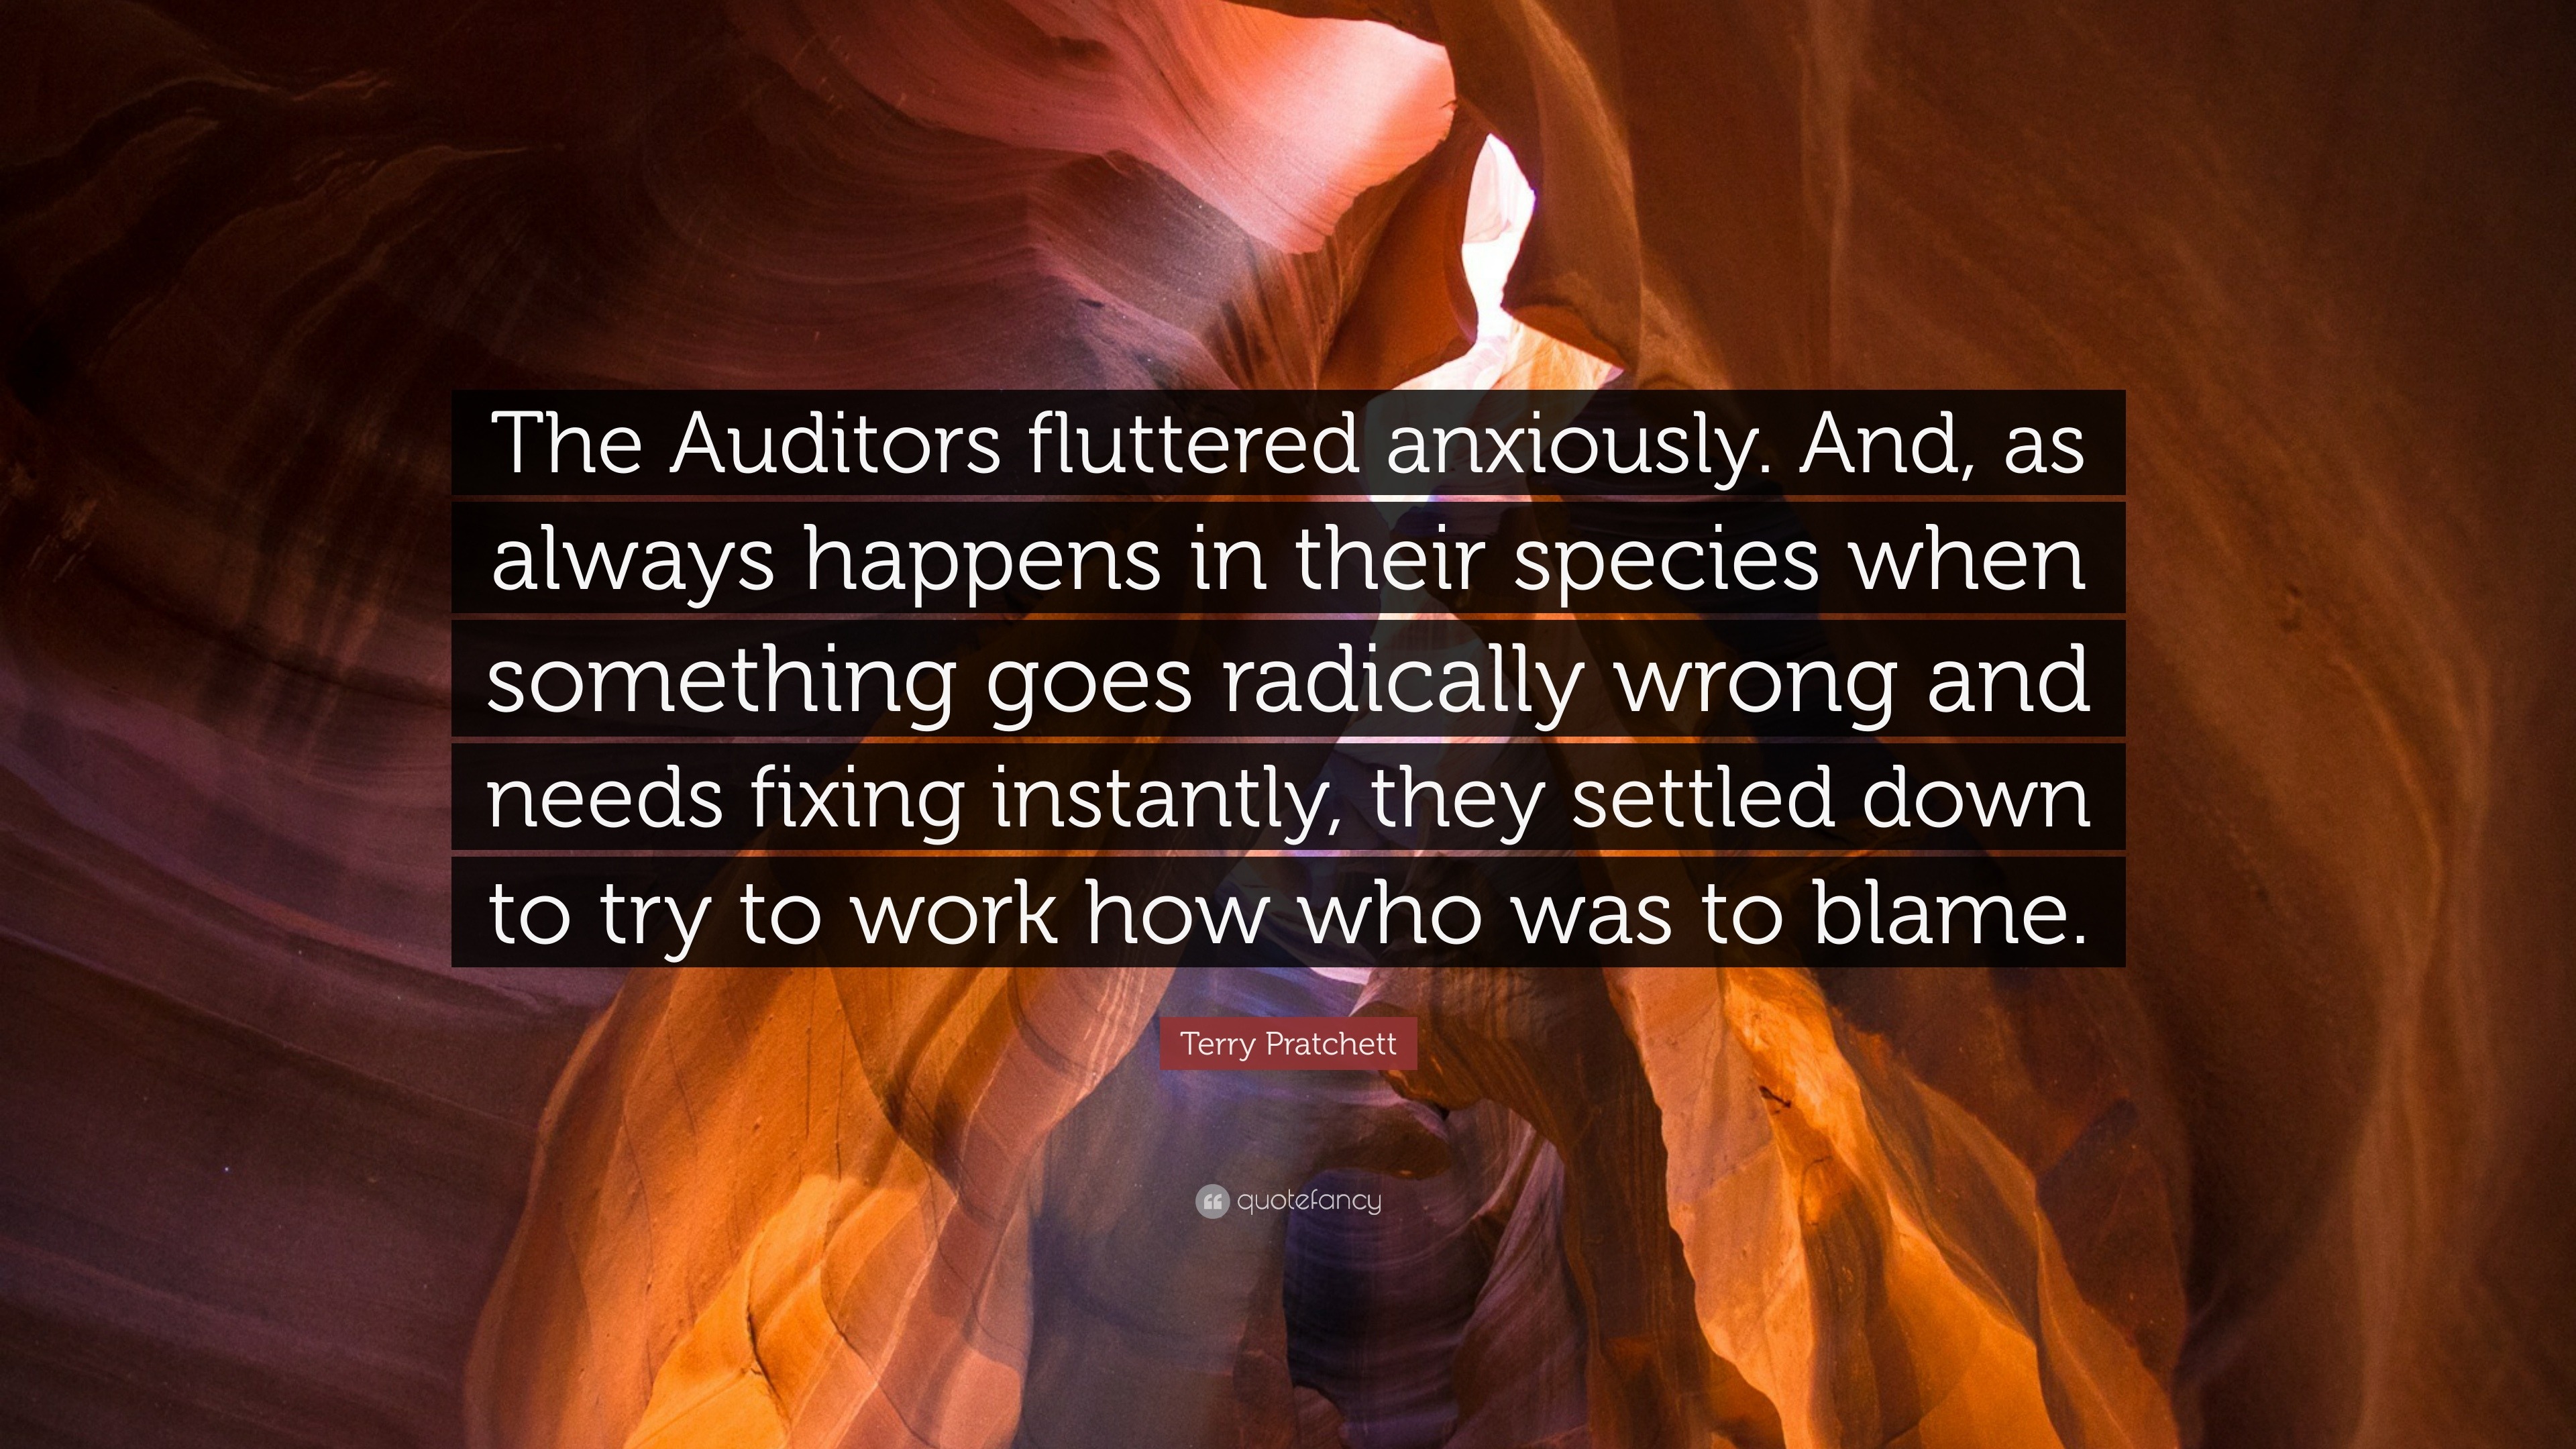 Terry Pratchett Quote: “The Auditors fluttered anxiously. And, as